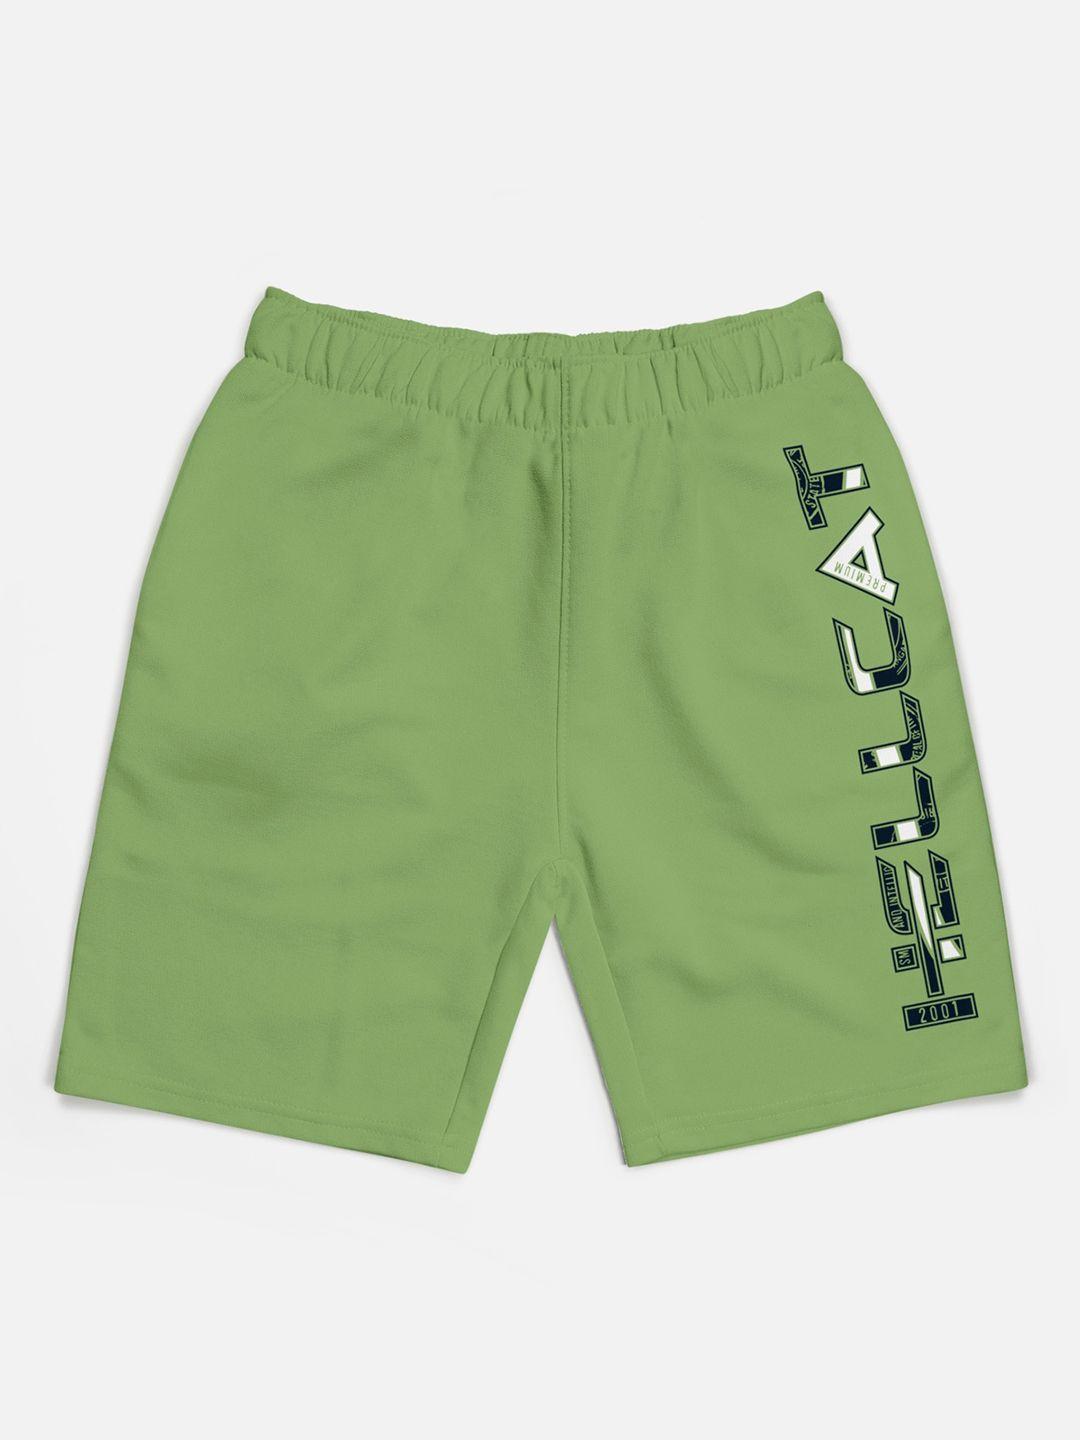 hellcat-boys-mid-rise-typography-printed-cotton-shorts